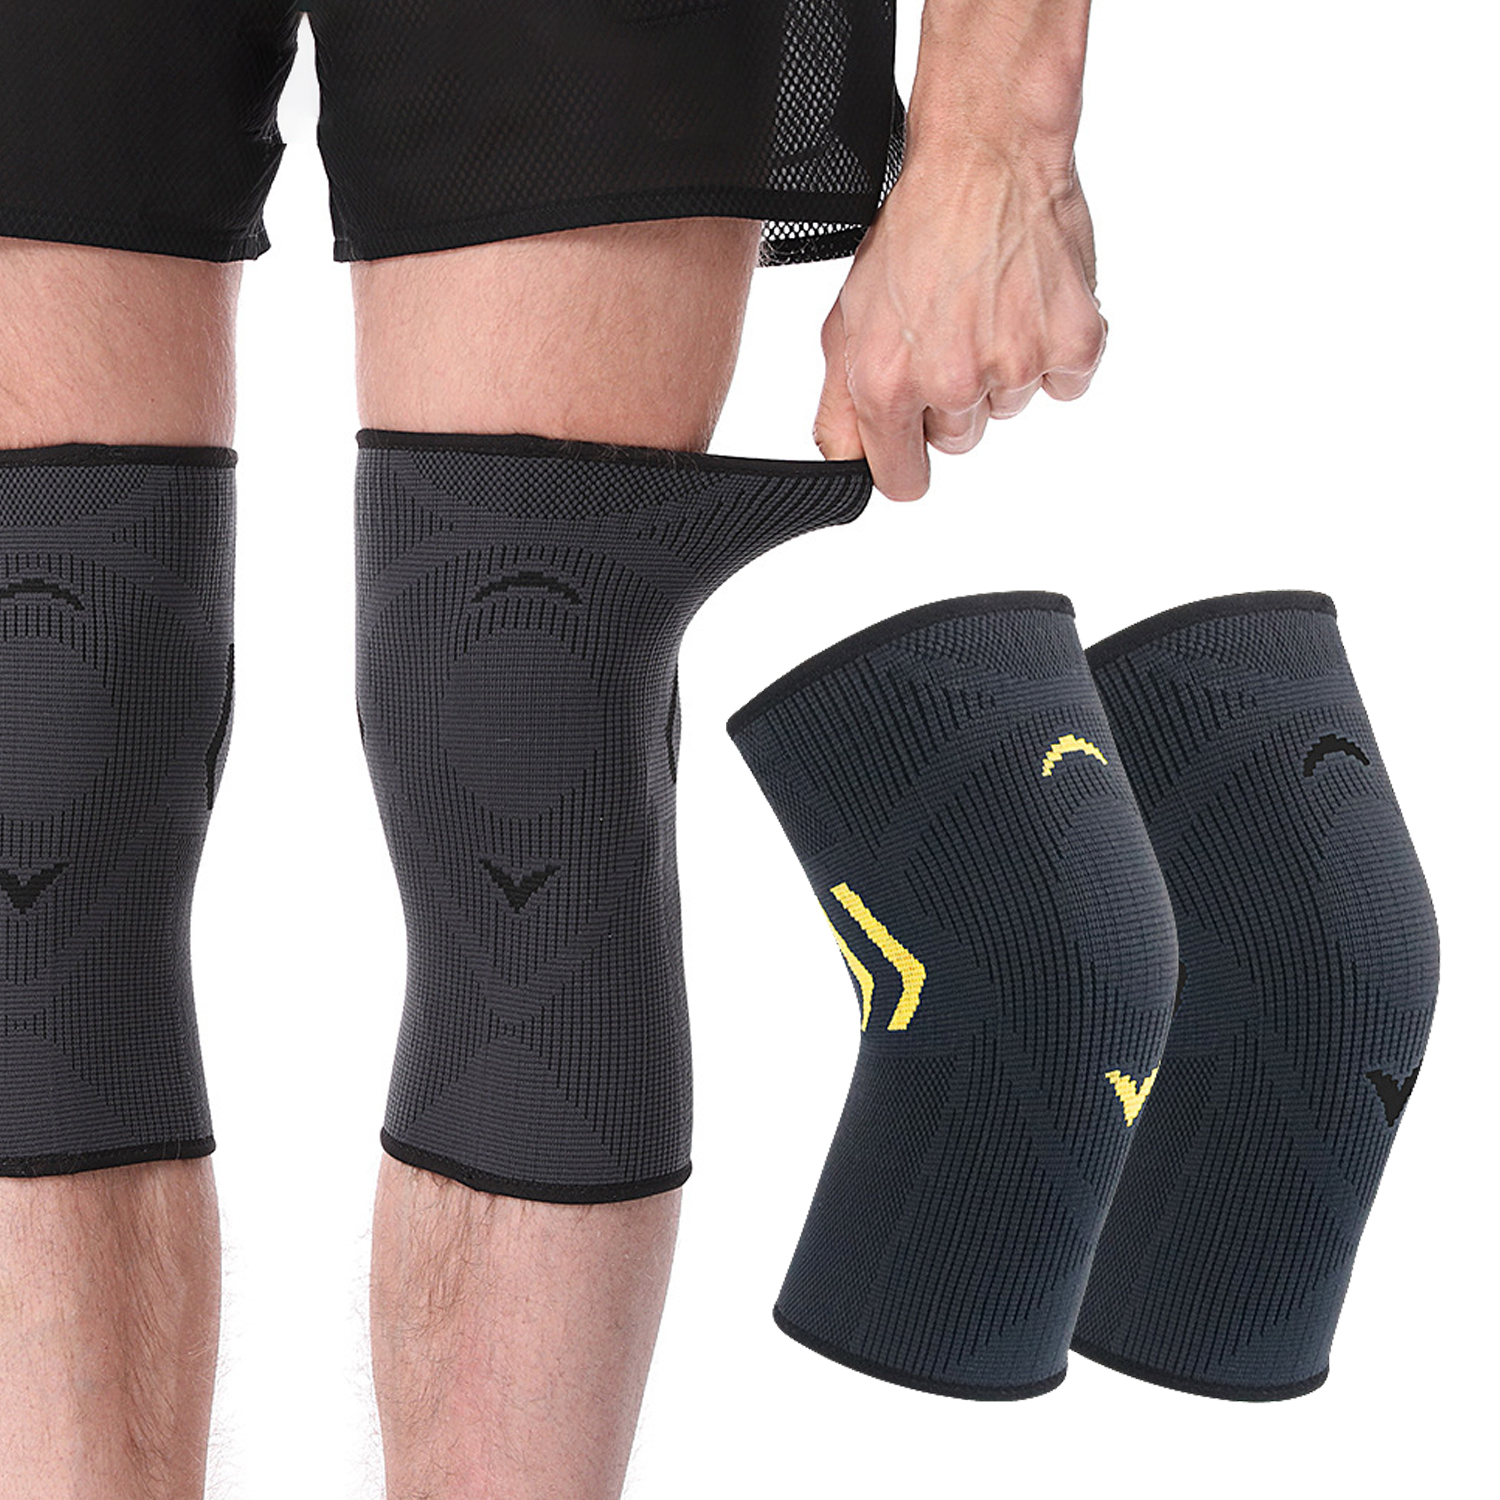 Professional Non Slip Knitting Knee Compression Sleeve For Running Weightlifting Sports Knee Pads